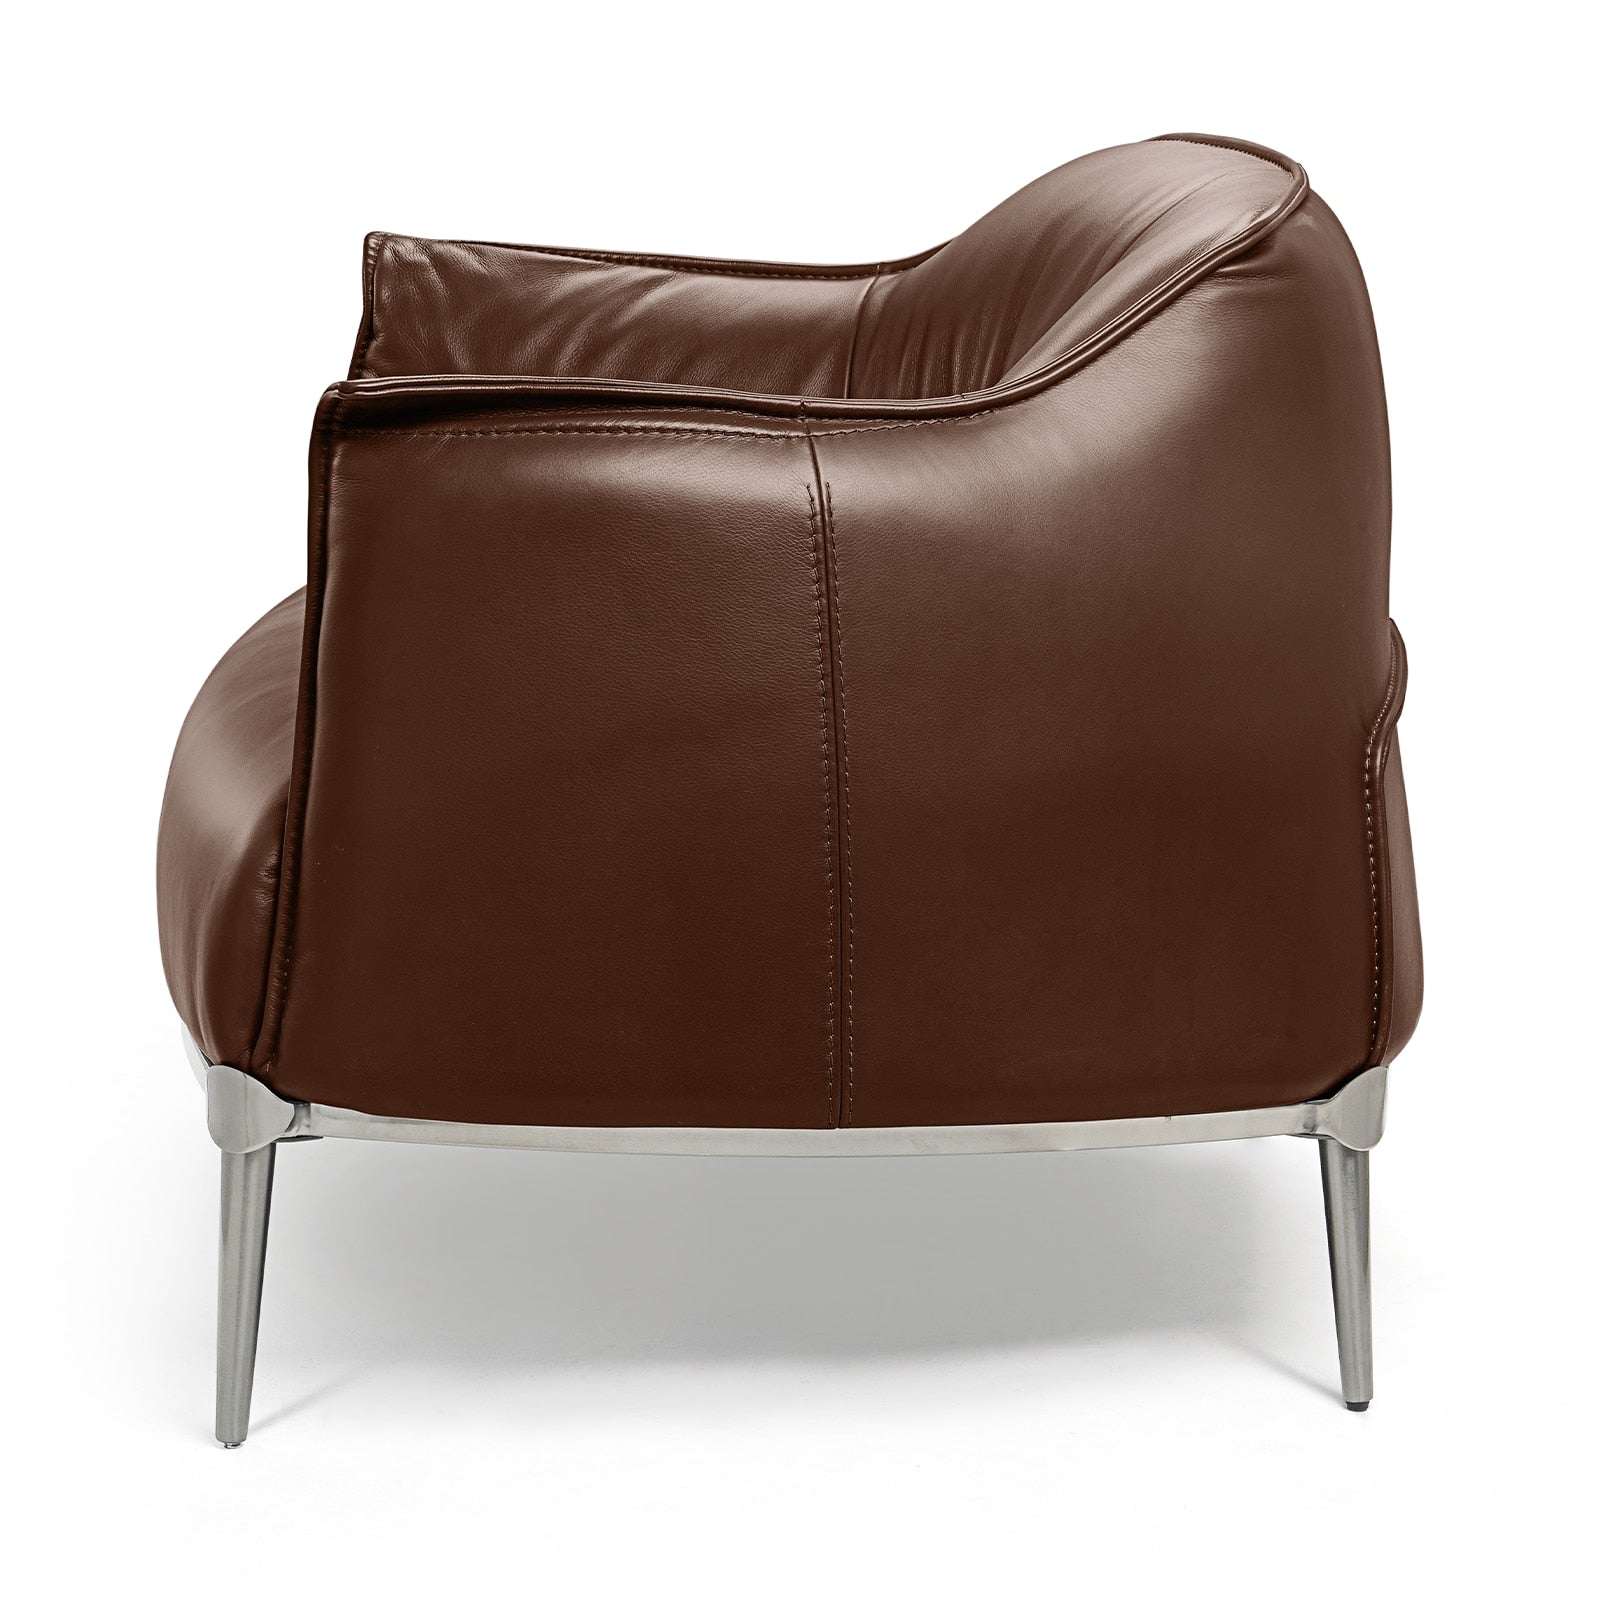 Arthia Designs - ARCHIBALD Leather Armchair by Jean-Marie Massaud - Review